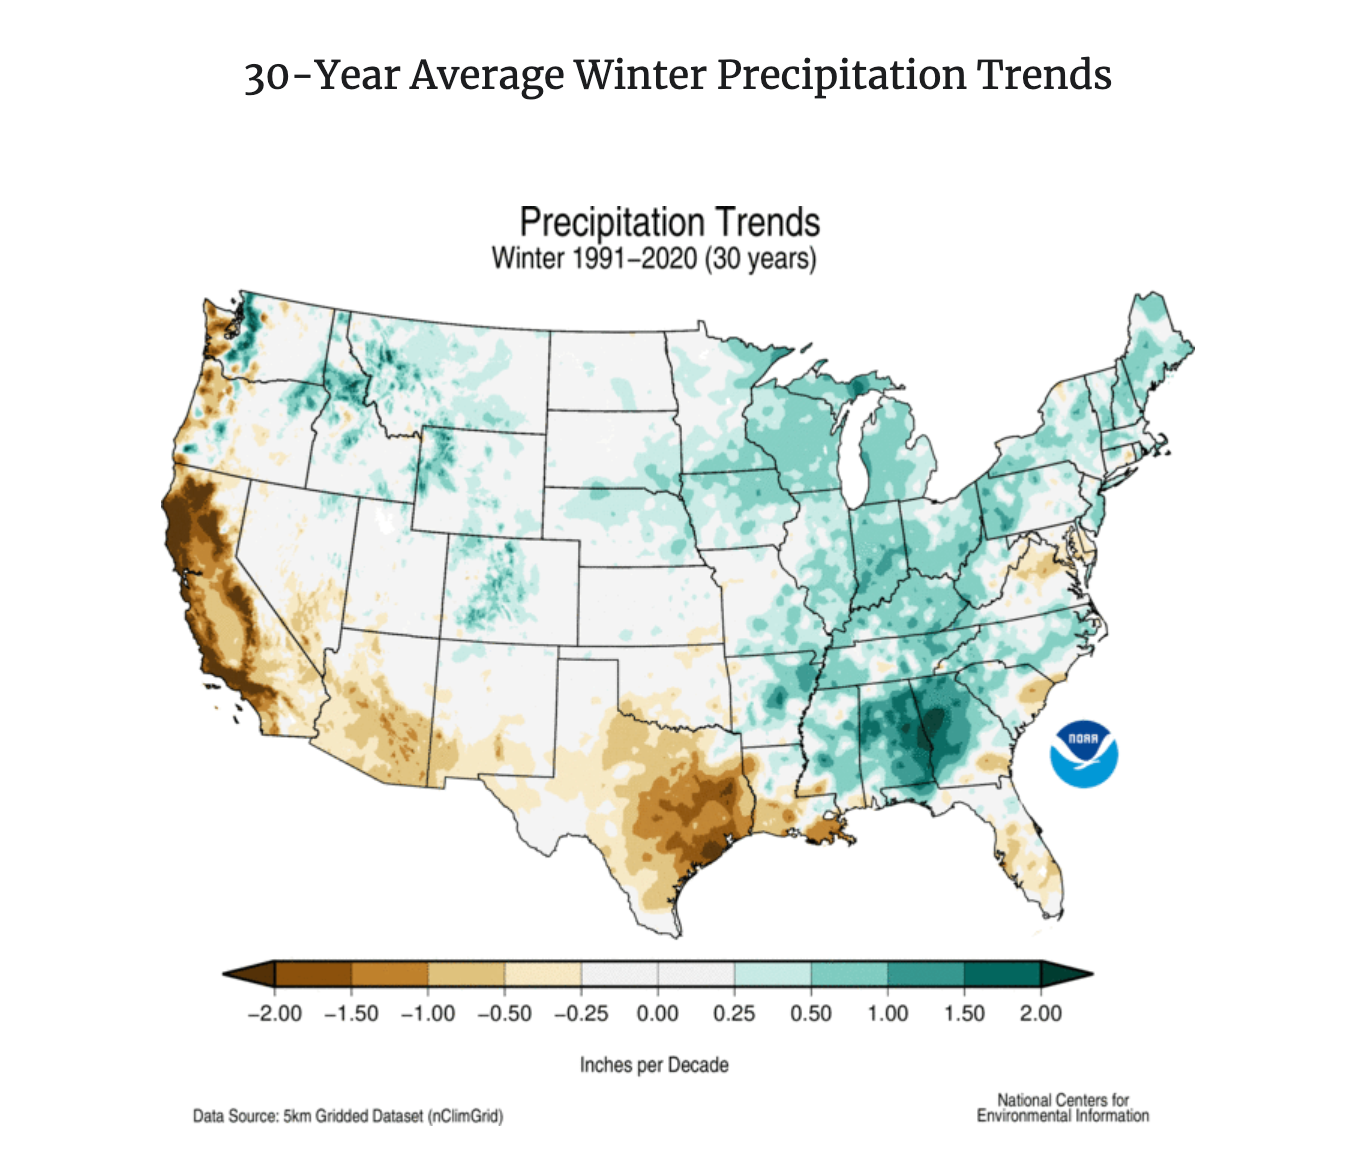 How precipitation levels have changed in winter over the past 30 years in the United States